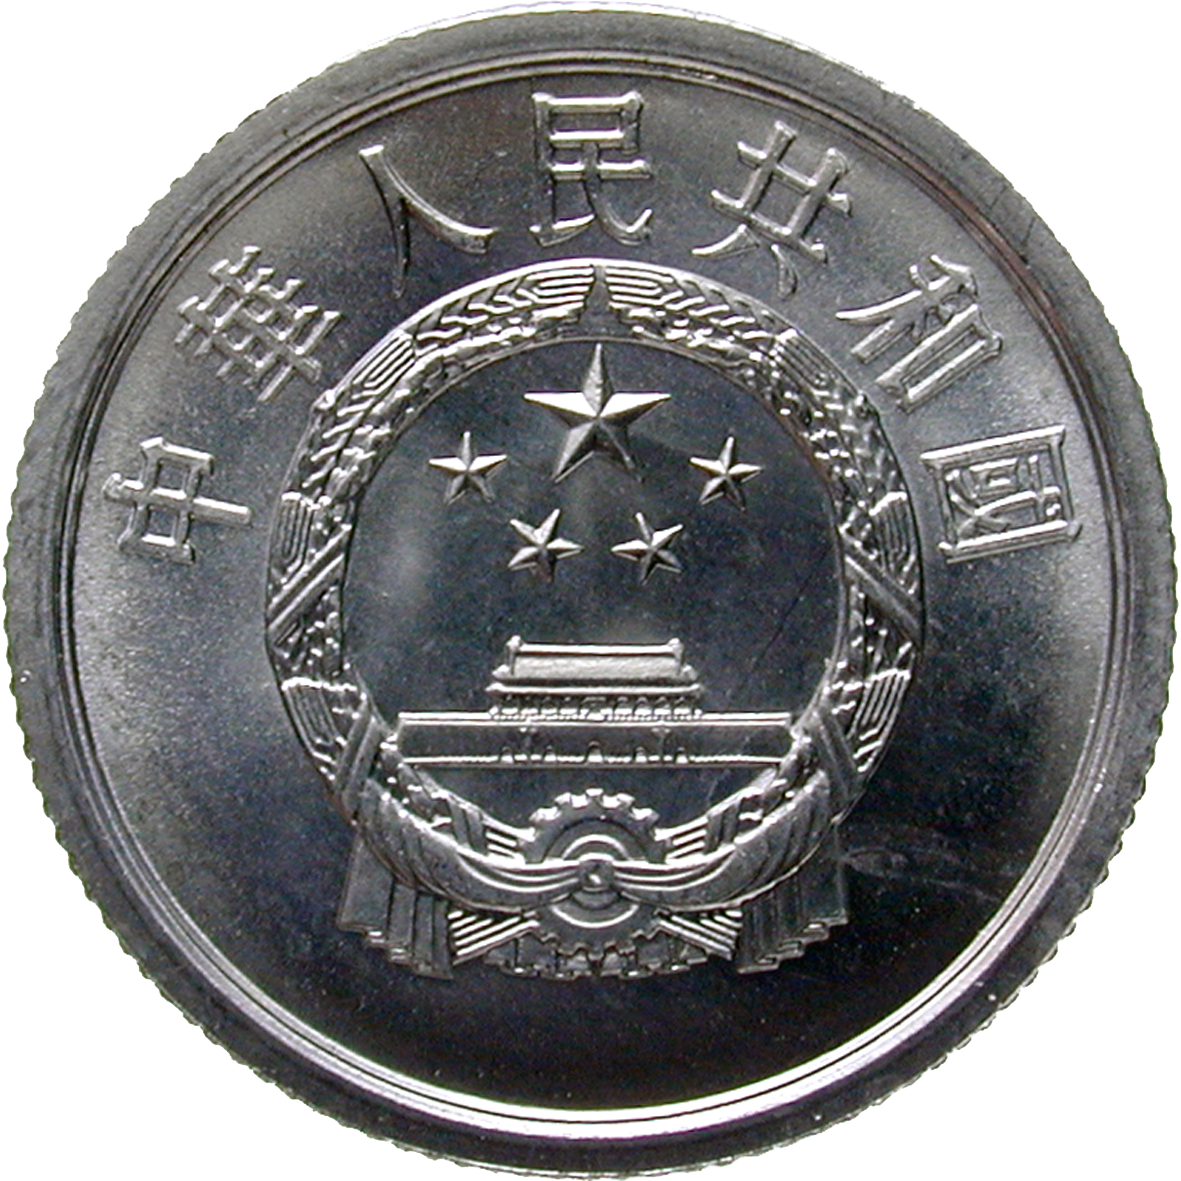 People's Republic of China, 2 Fen 1980 (obverse)